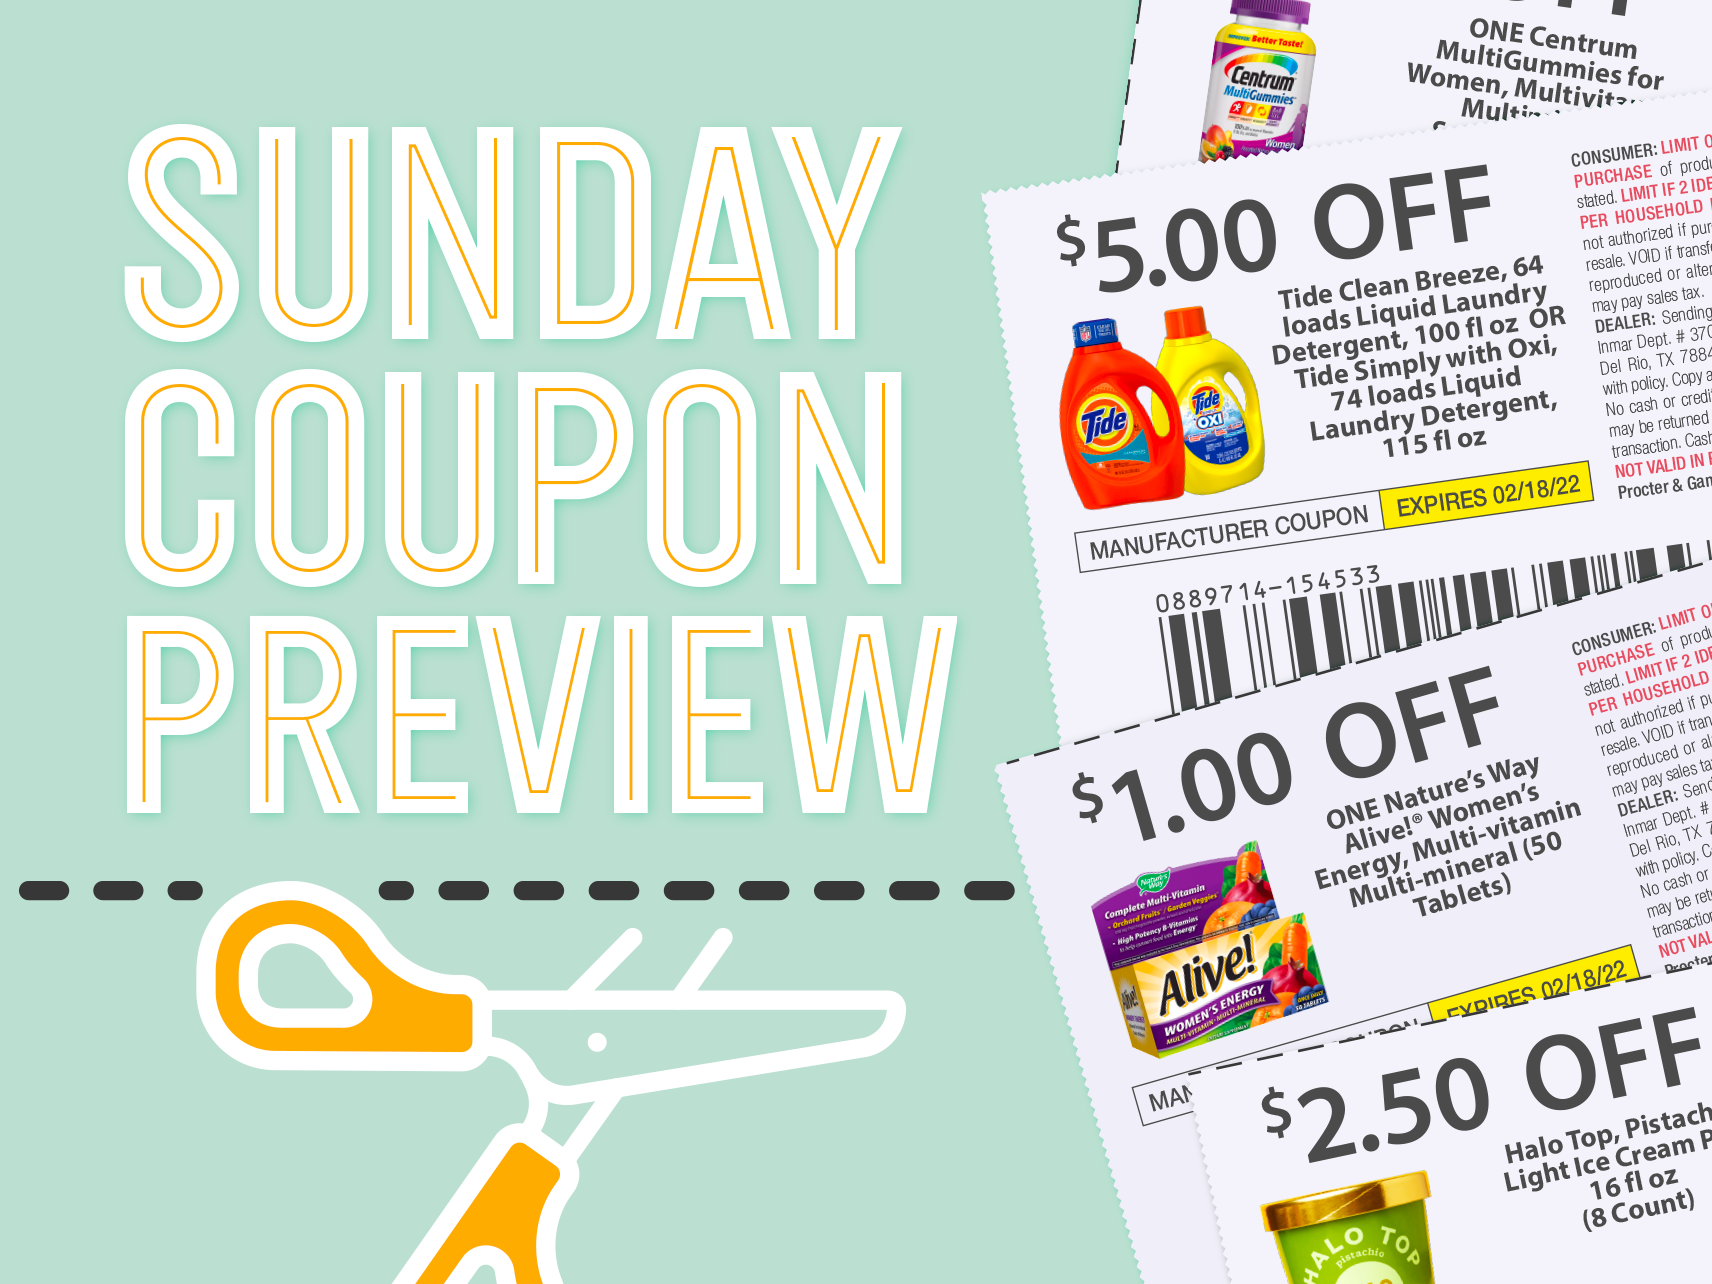 Sunday Coupon Preview For 3/19 – Two Inserts